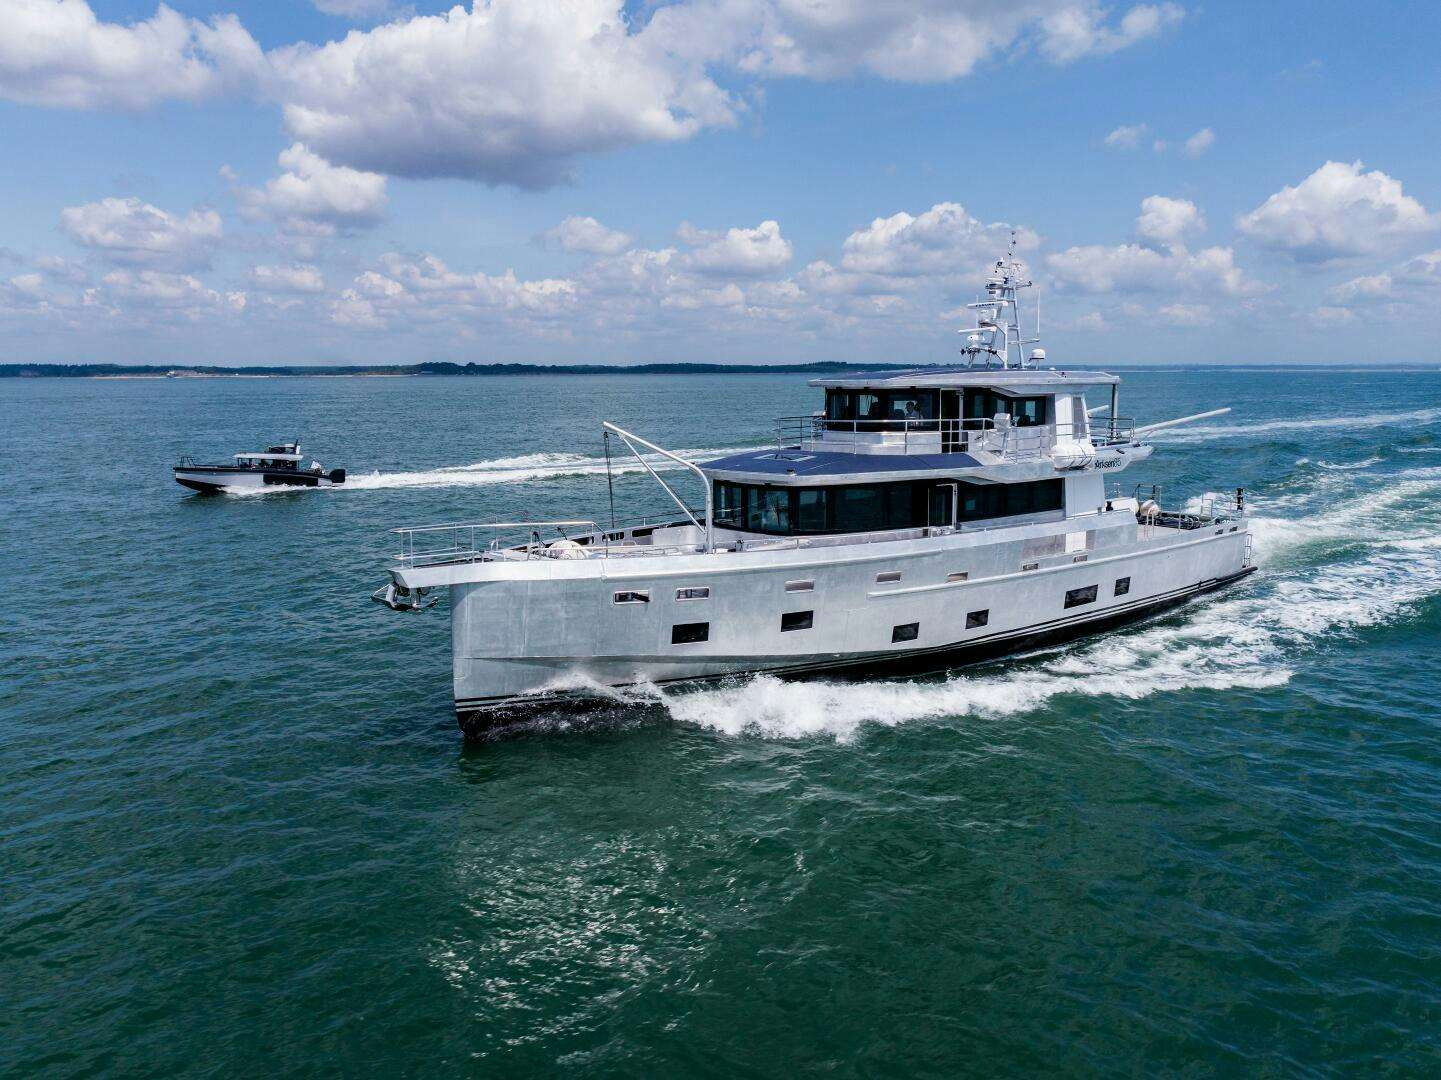 Project ocean
Yacht for Sale